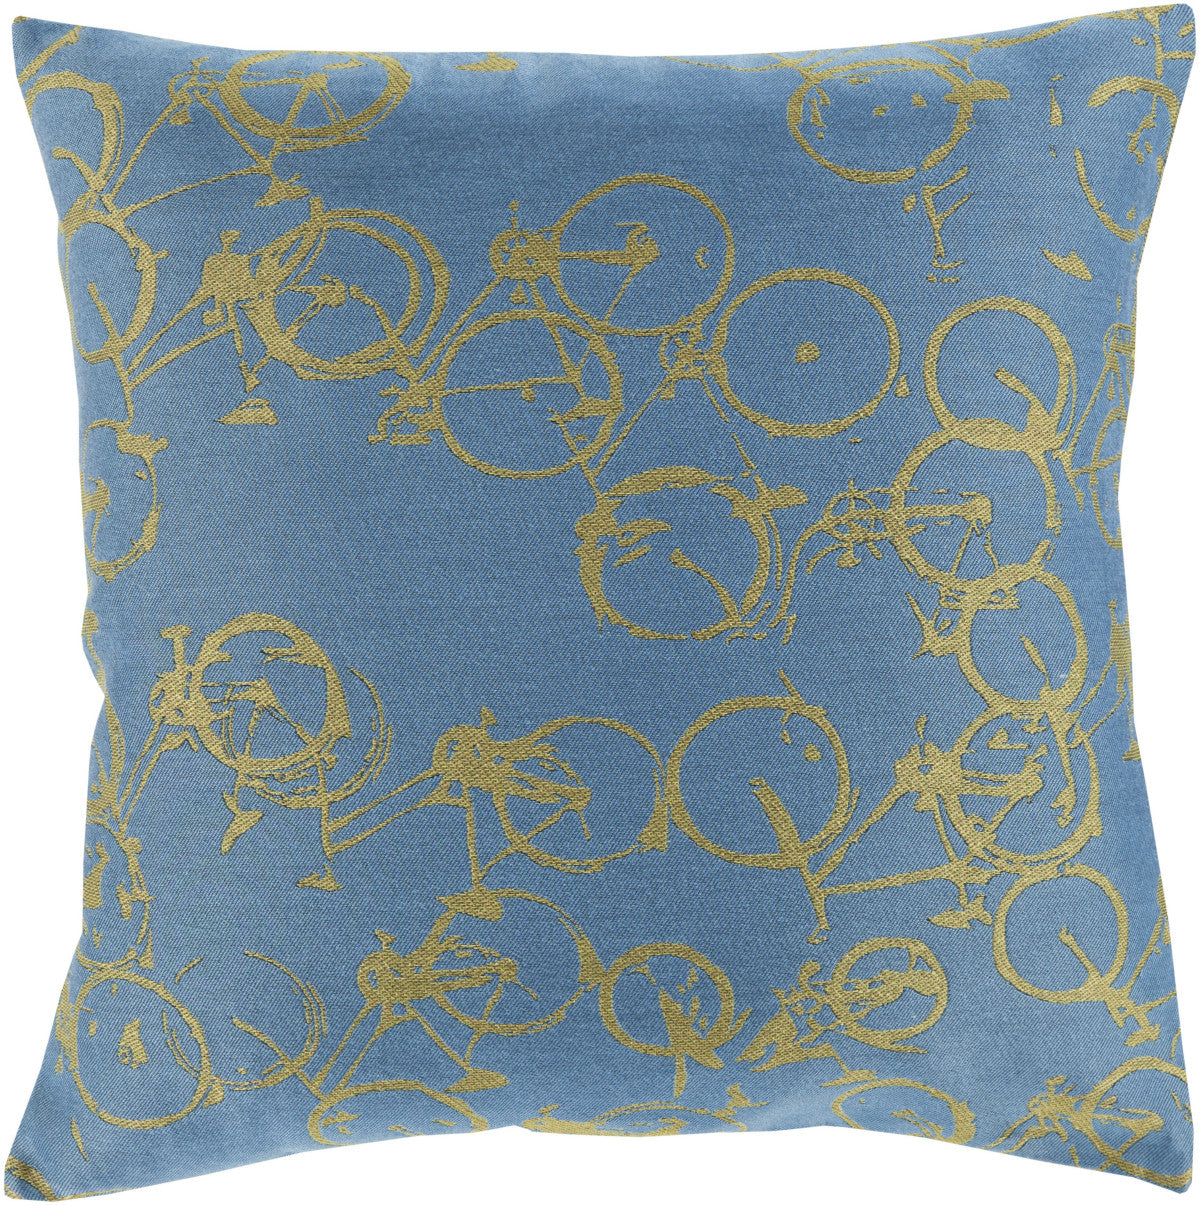 Surya Pedal Power Bold Bicycles PDP-004 Pillow by Mike Farrell main image